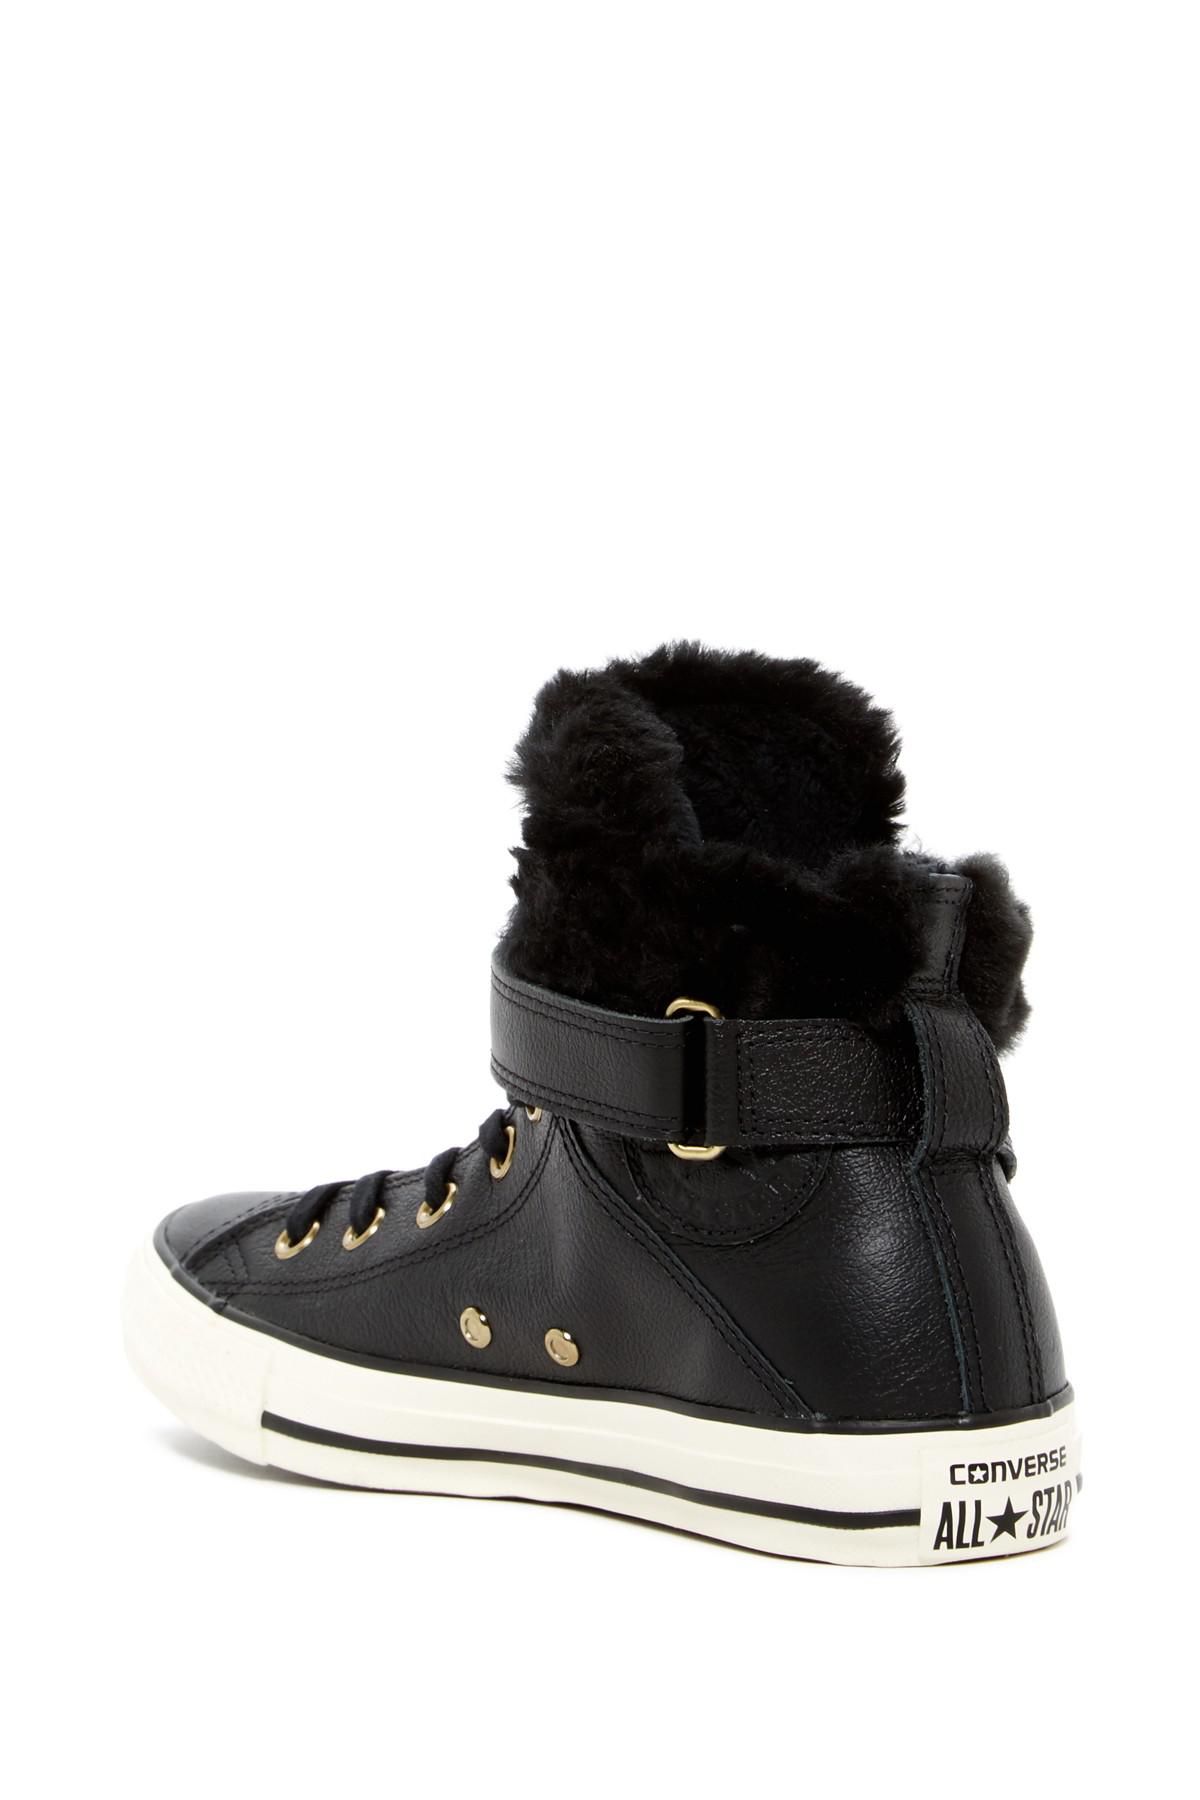 Lyst - Converse Chuck Taylor All Star Faux Fur Lined Leather High-top Sneaker in Black for Men